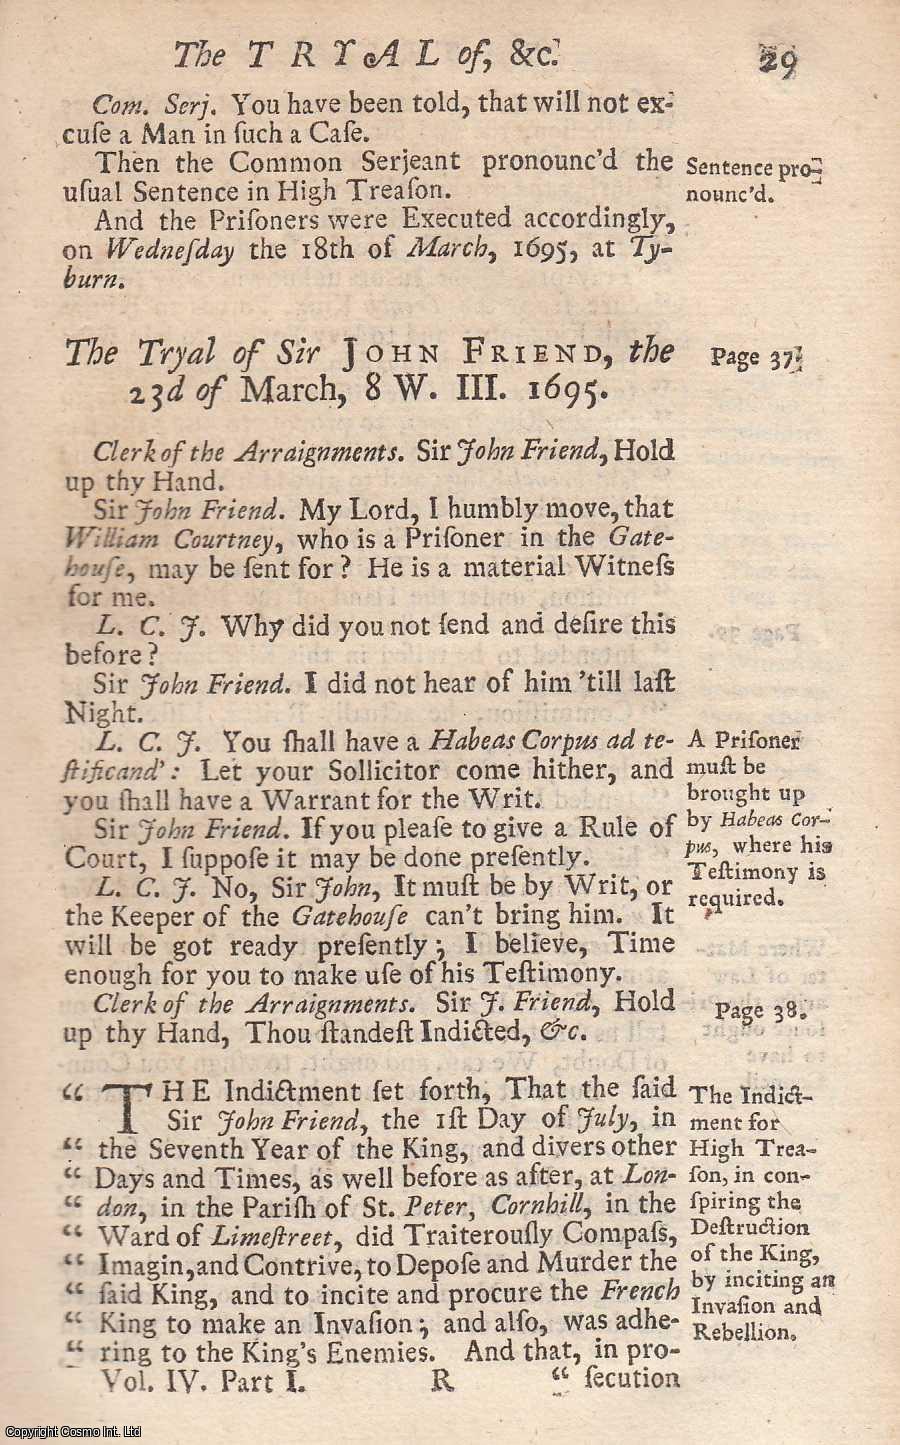 TRIAL - The Trial of Sir John Freind, Knight, at the Old Bailey, for High Treason, March 23, 1695. An original report from the collected Tryals for High Treason, and Other Crimes, 1720.